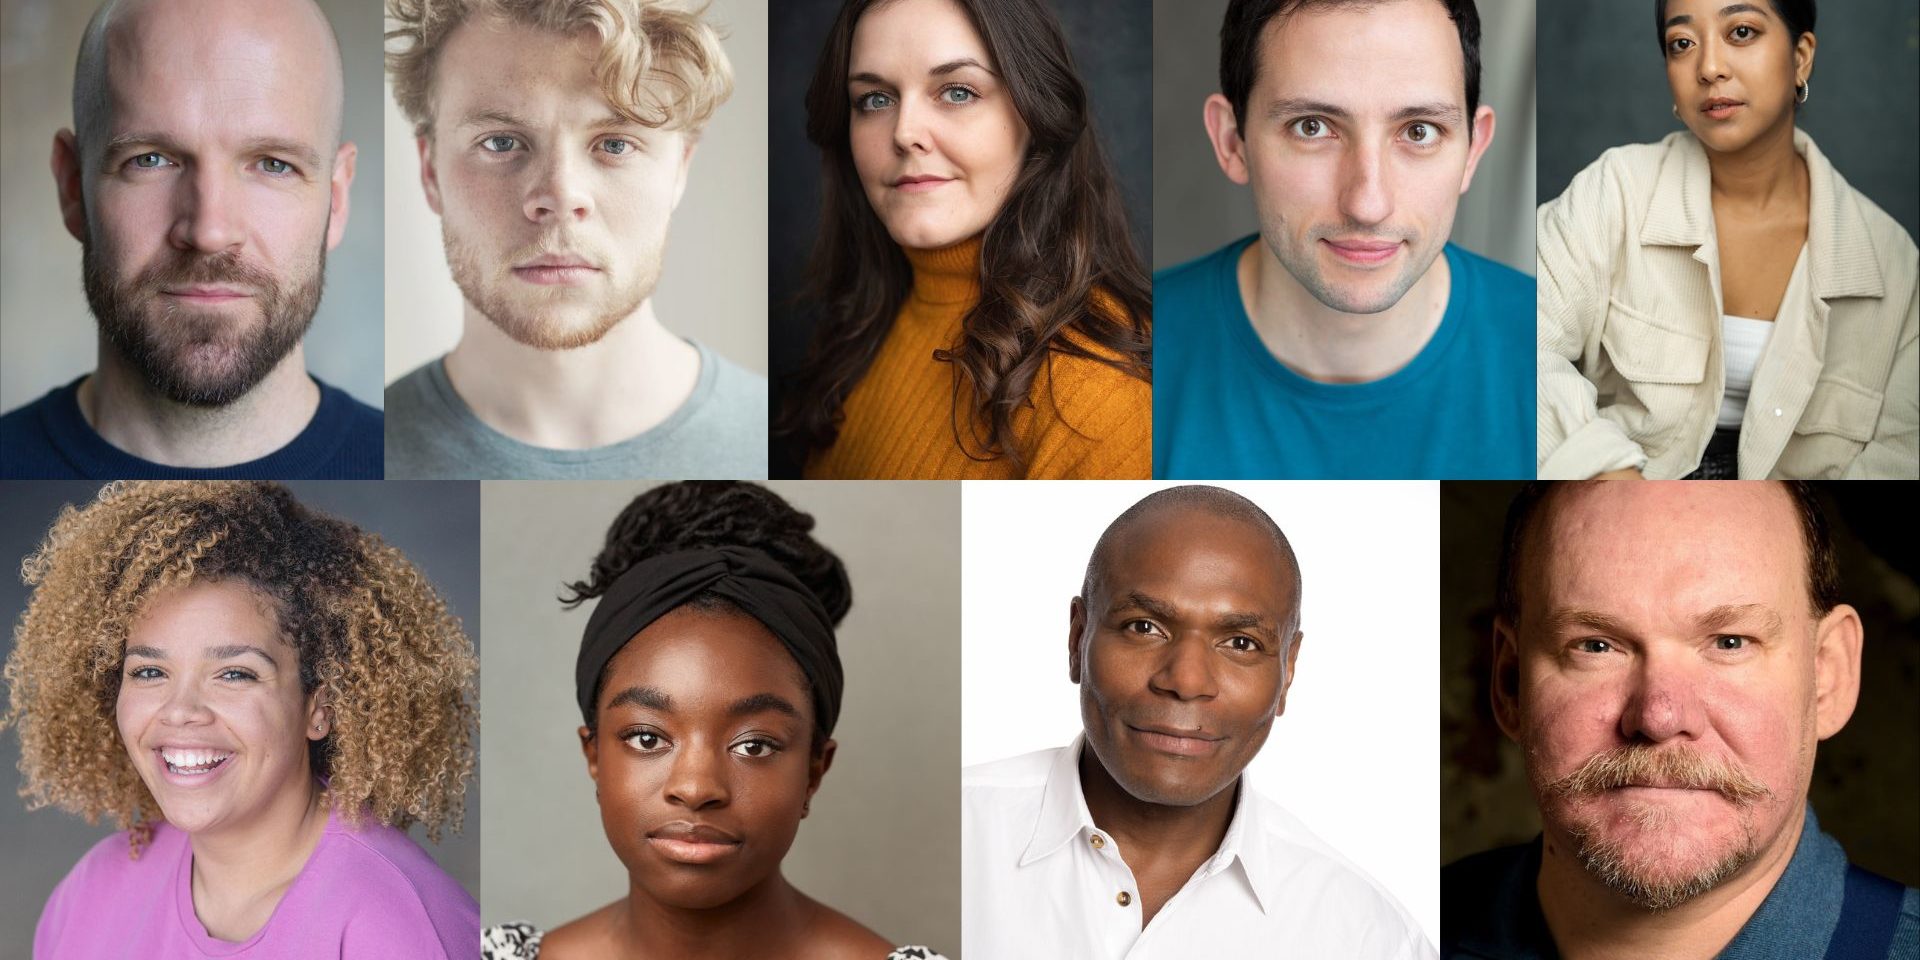 Cast announced for new production of Little Shop of Horrors coming to theatres this spring